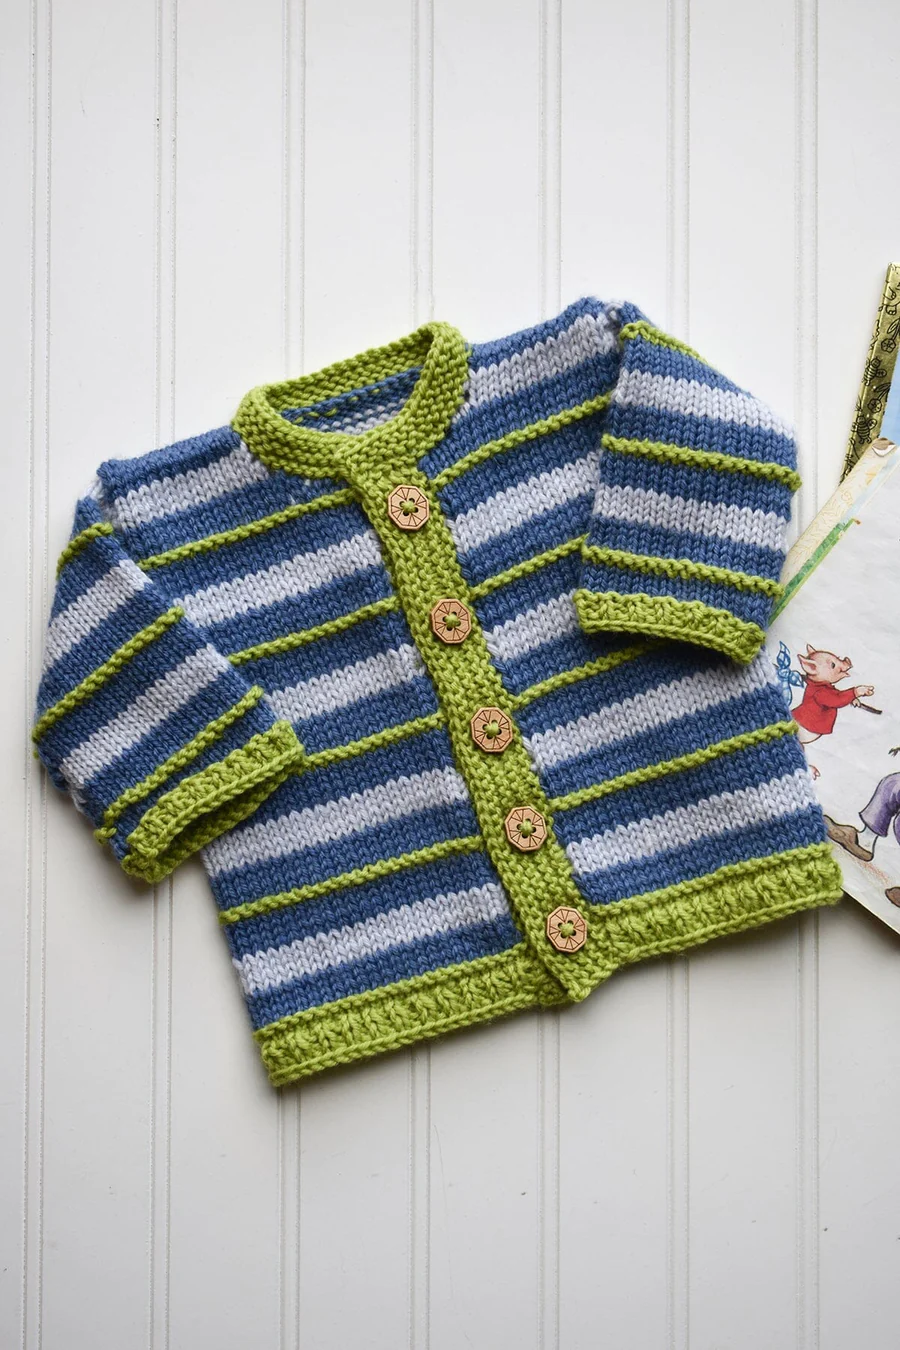 Free Knitting Patterns for Baby Cardigans - Knitting Bee